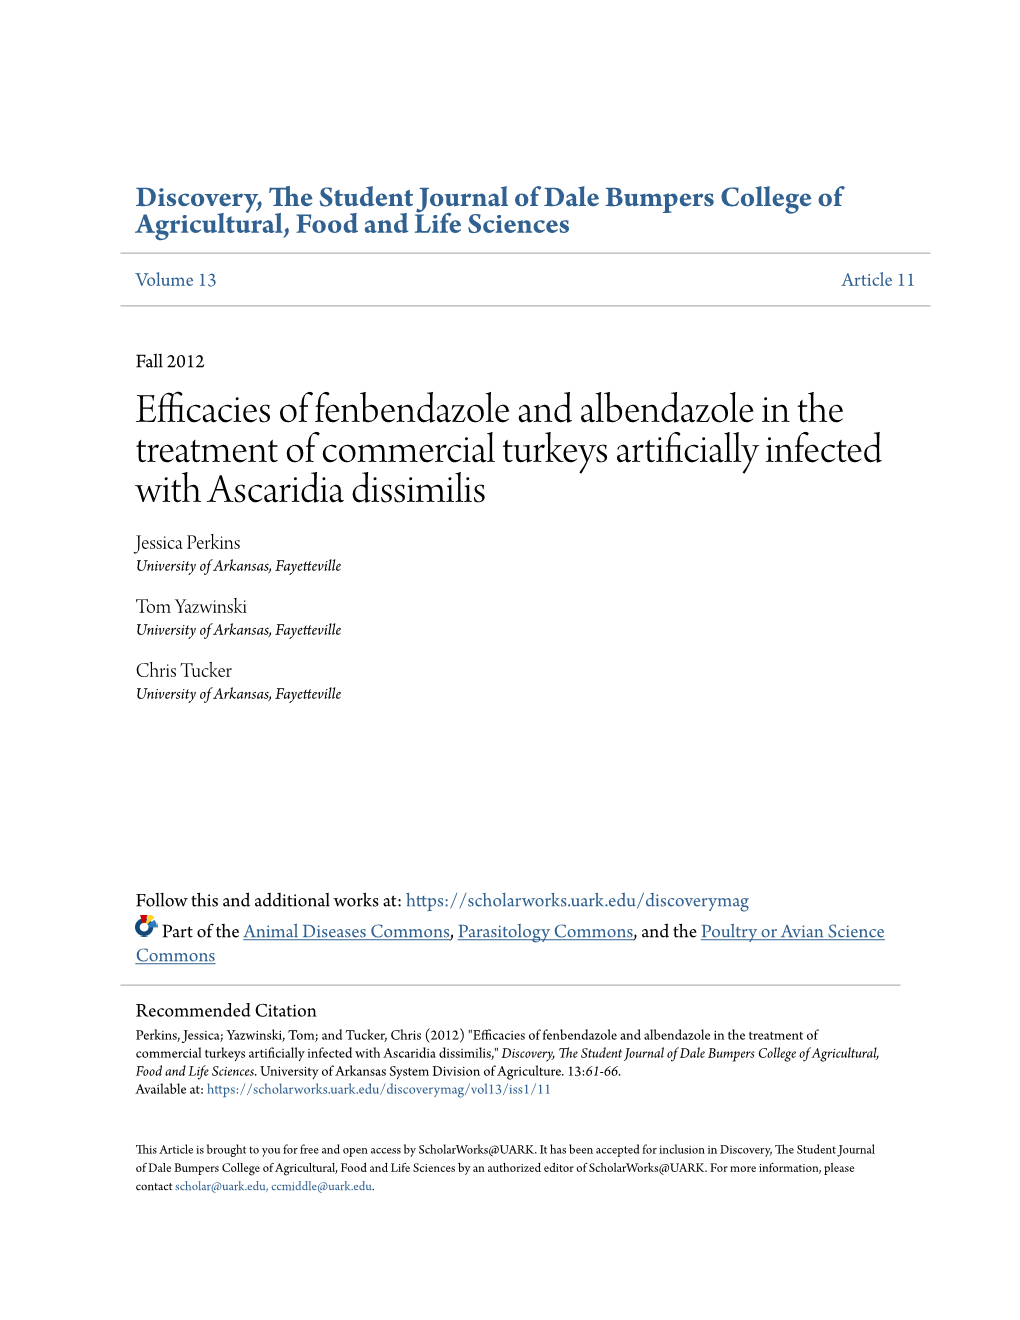 Efficacies of Fenbendazole and Albendazole in the Treatment Of